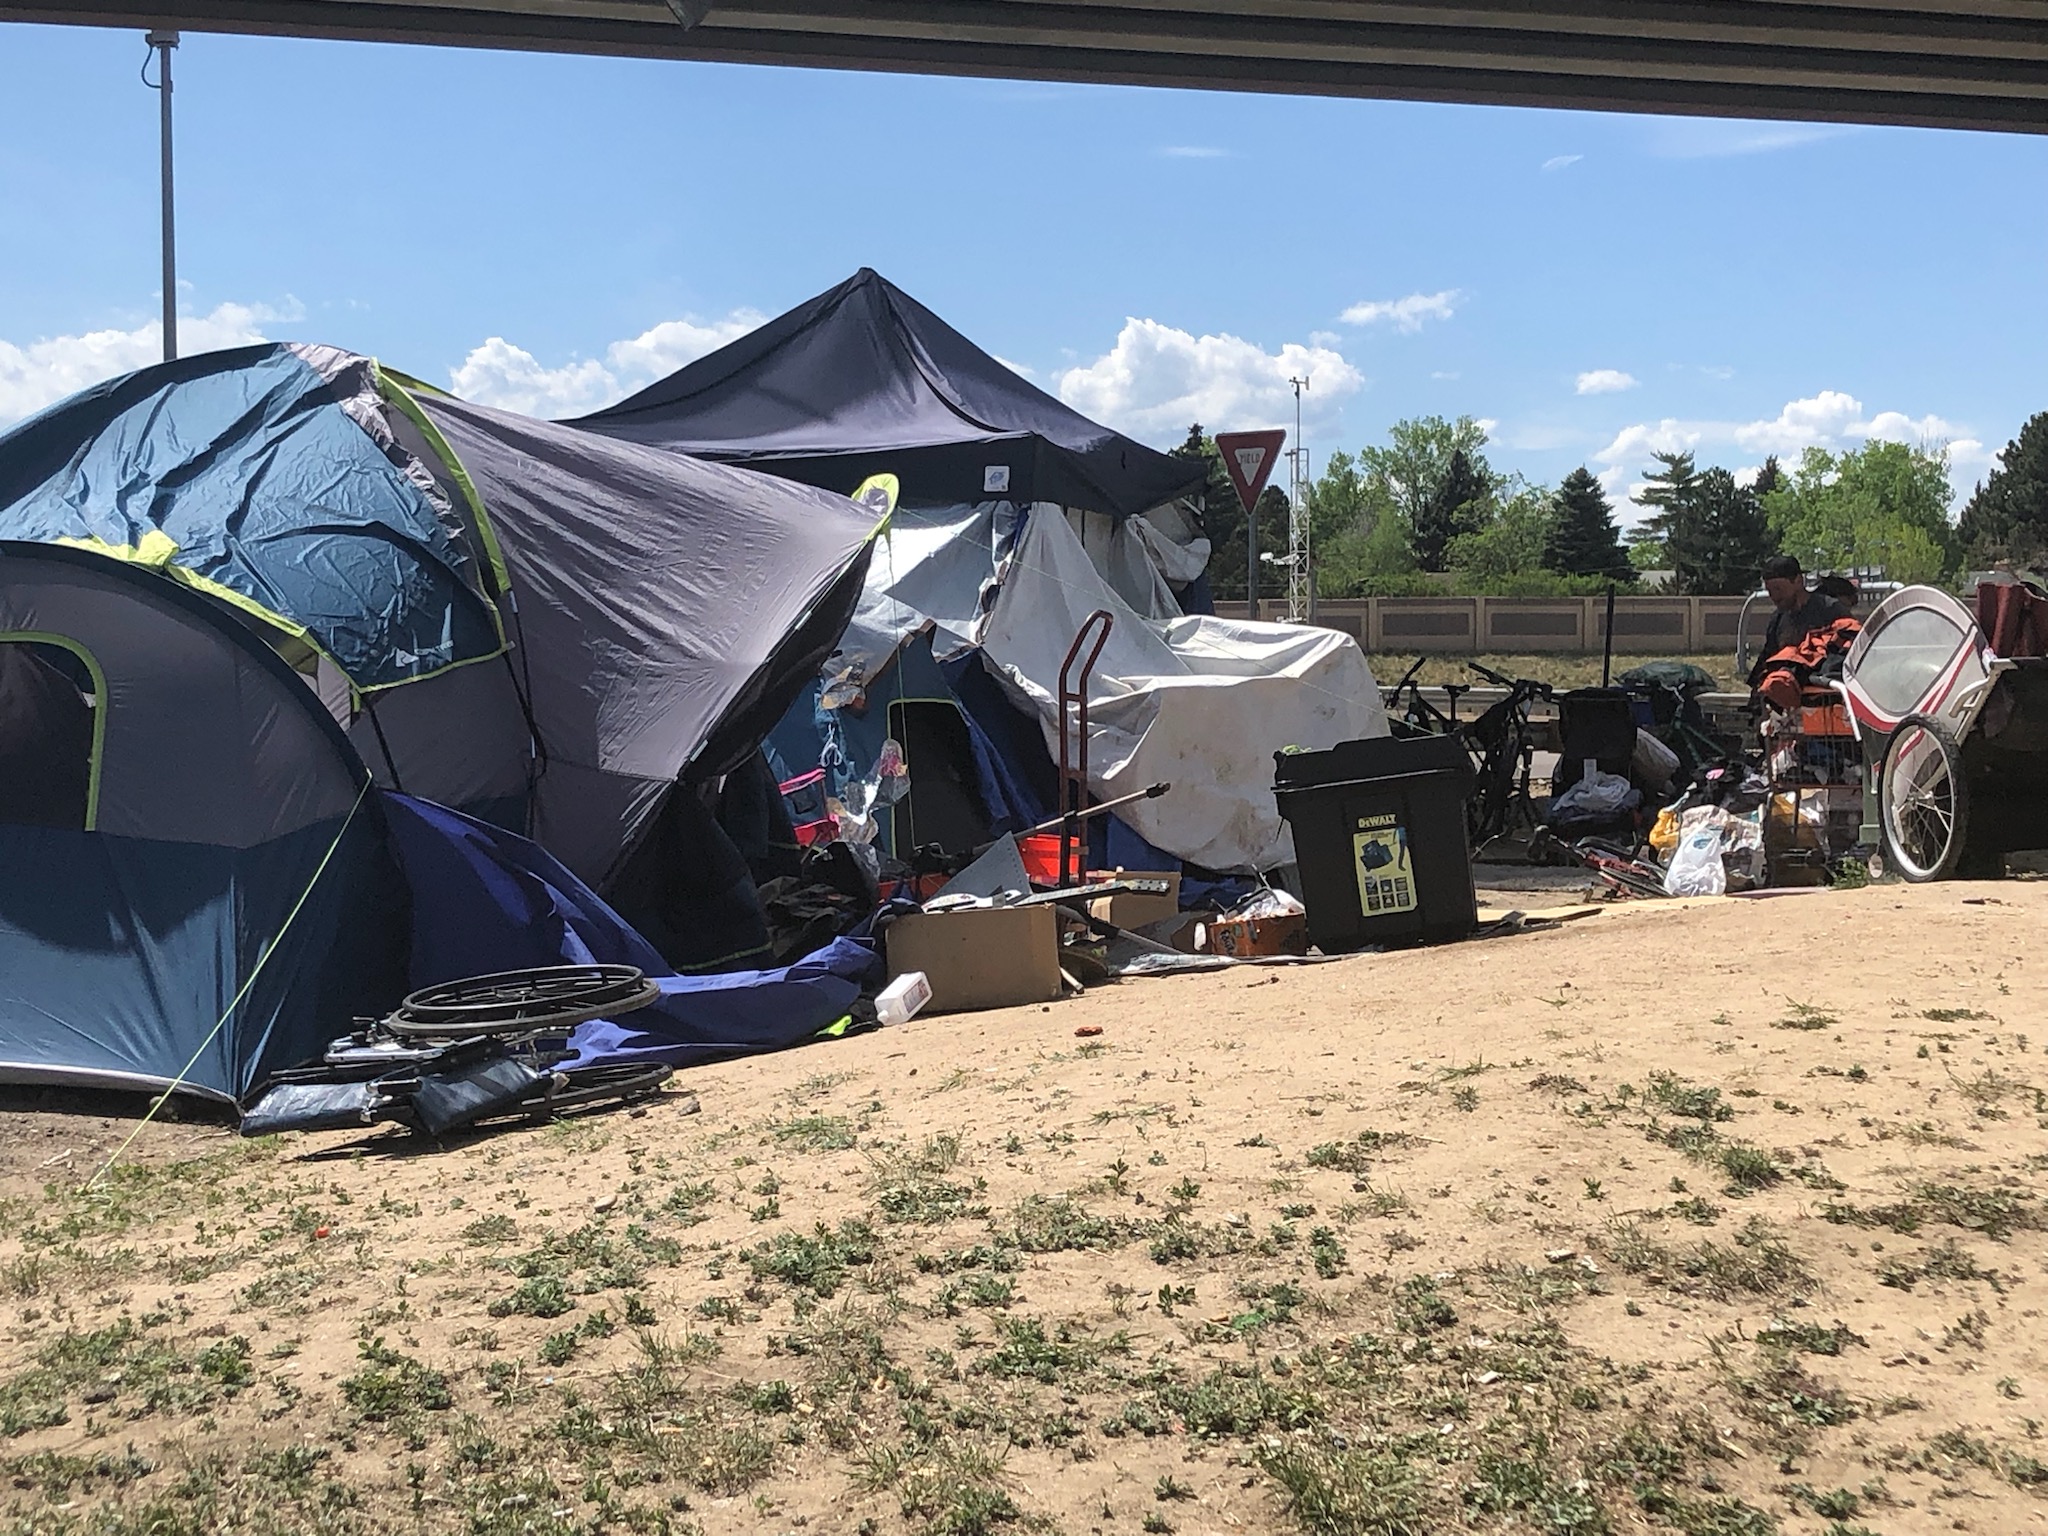 Homeless tent encampment outside during the day